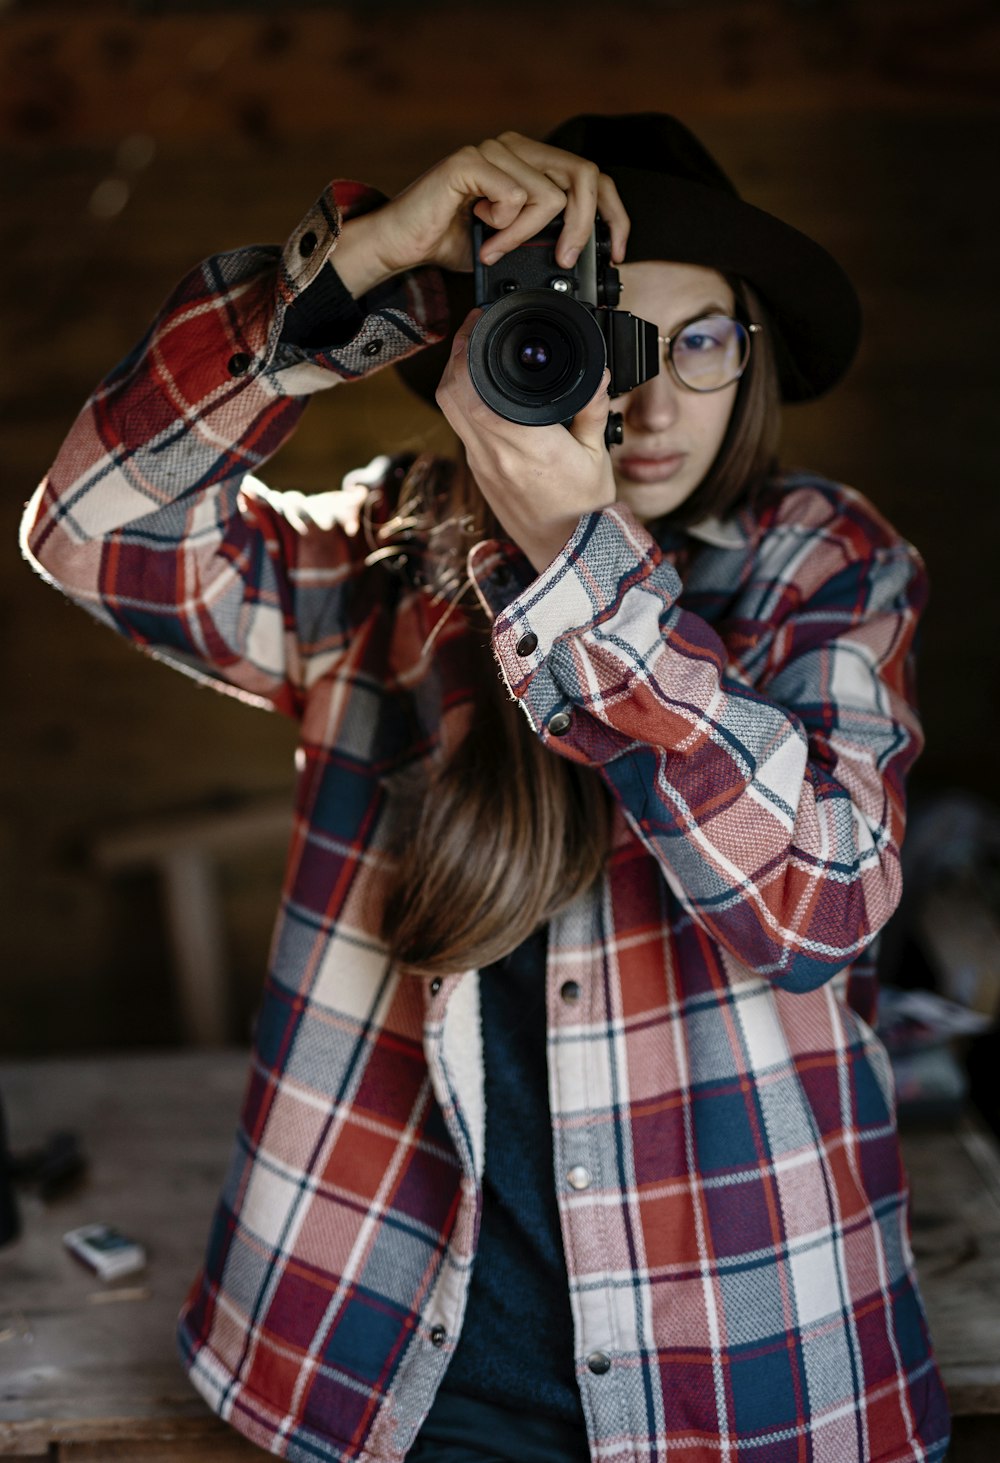 woman in red white and black plaid dress shirt holding black dslr camera